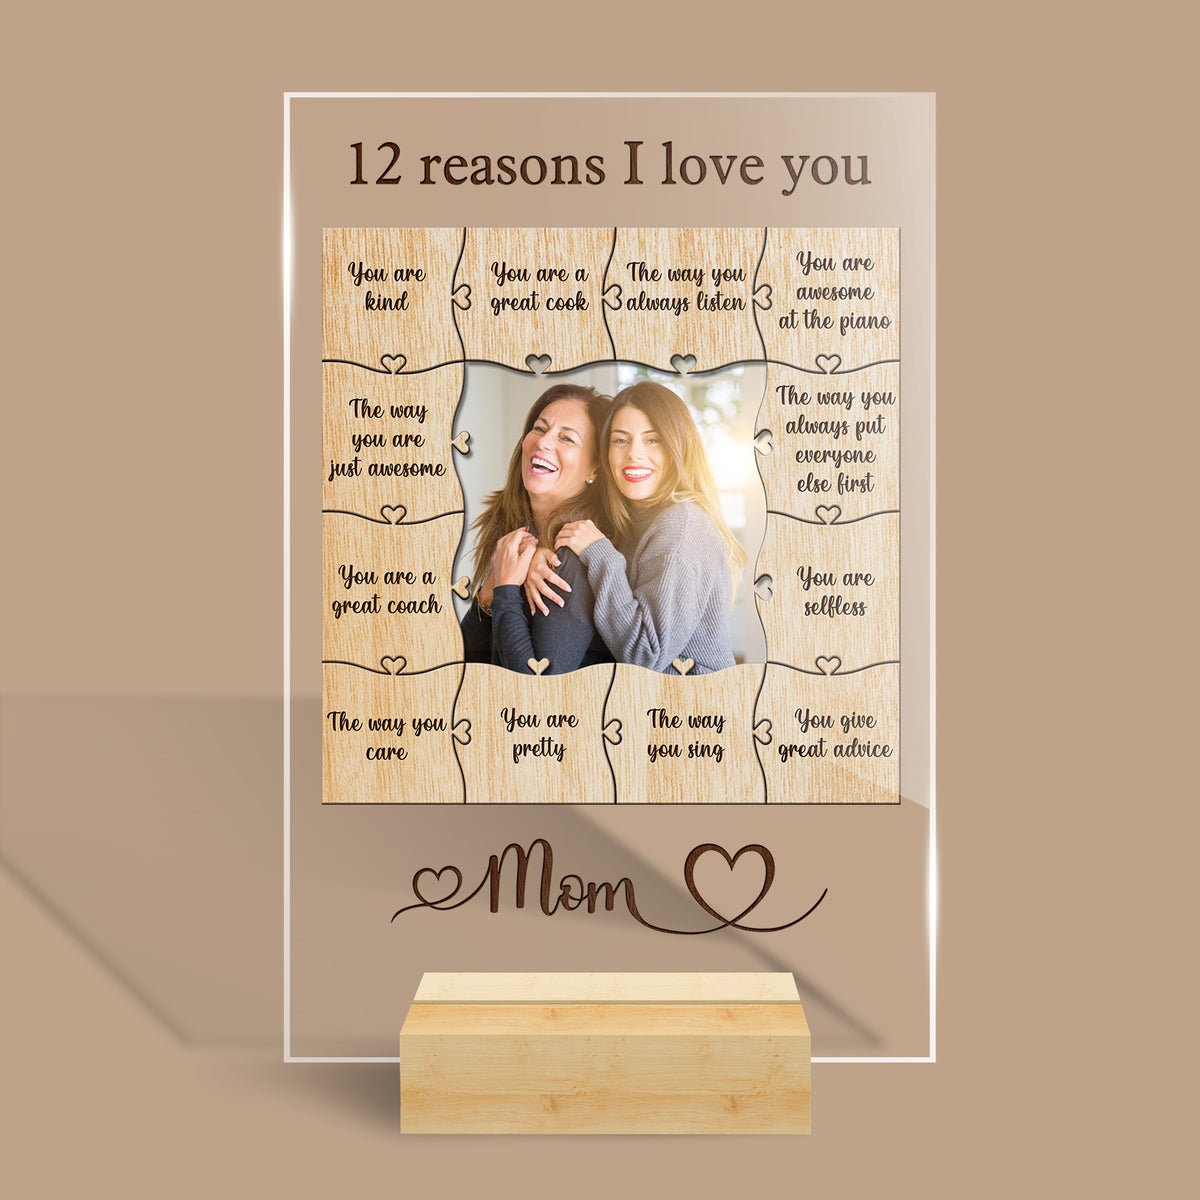 12 Reasons I Love You, Mom - Personalized Acrylic Plaque - Best Gift For Mother - Giftago